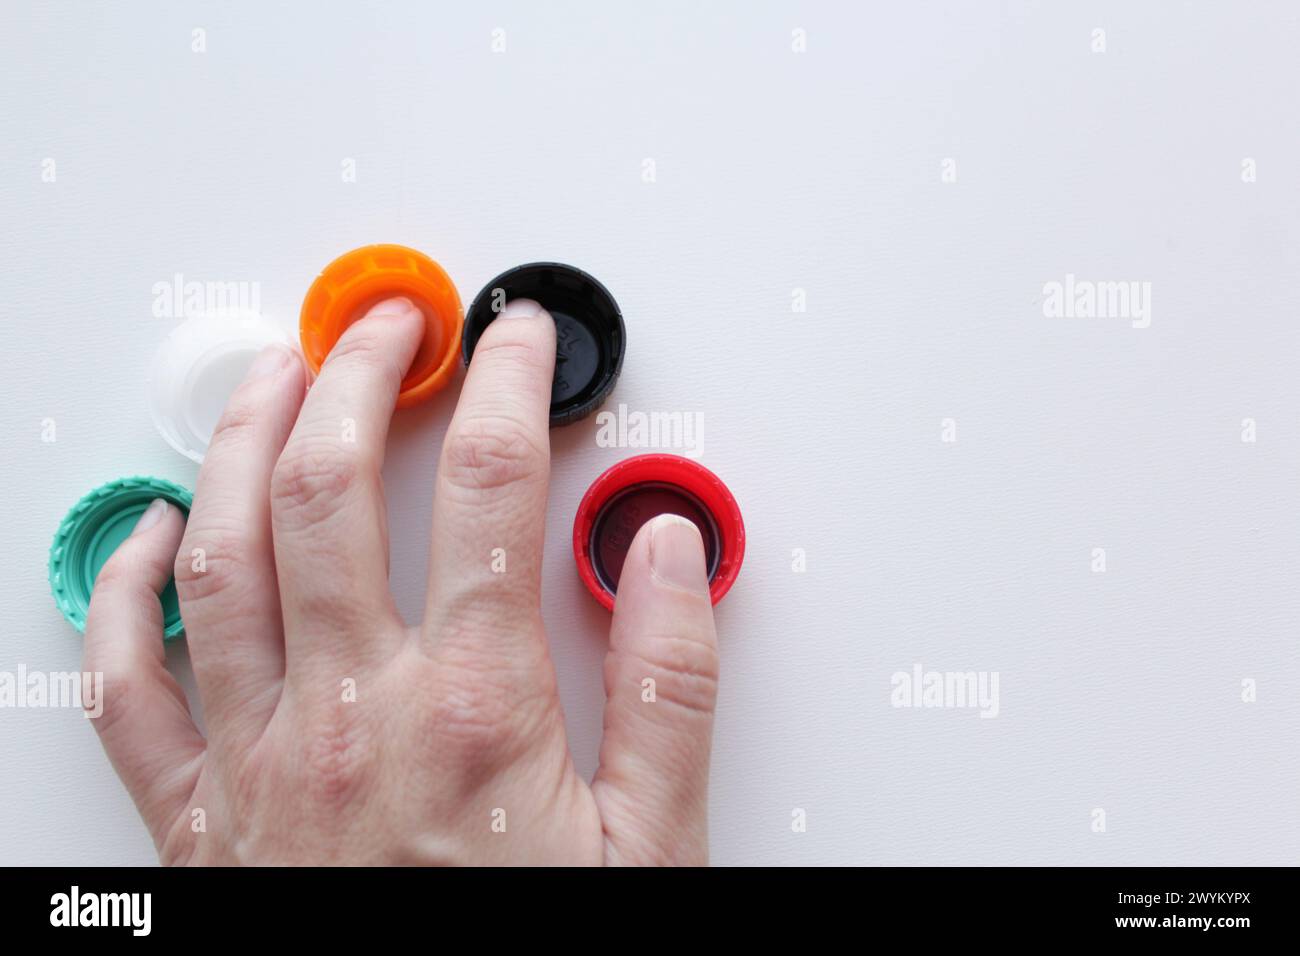 Woman's hand over five colorful plastic lids on white background, space for copy. Sustainability, recycling concept for June 5th World Environment Day Stock Photo